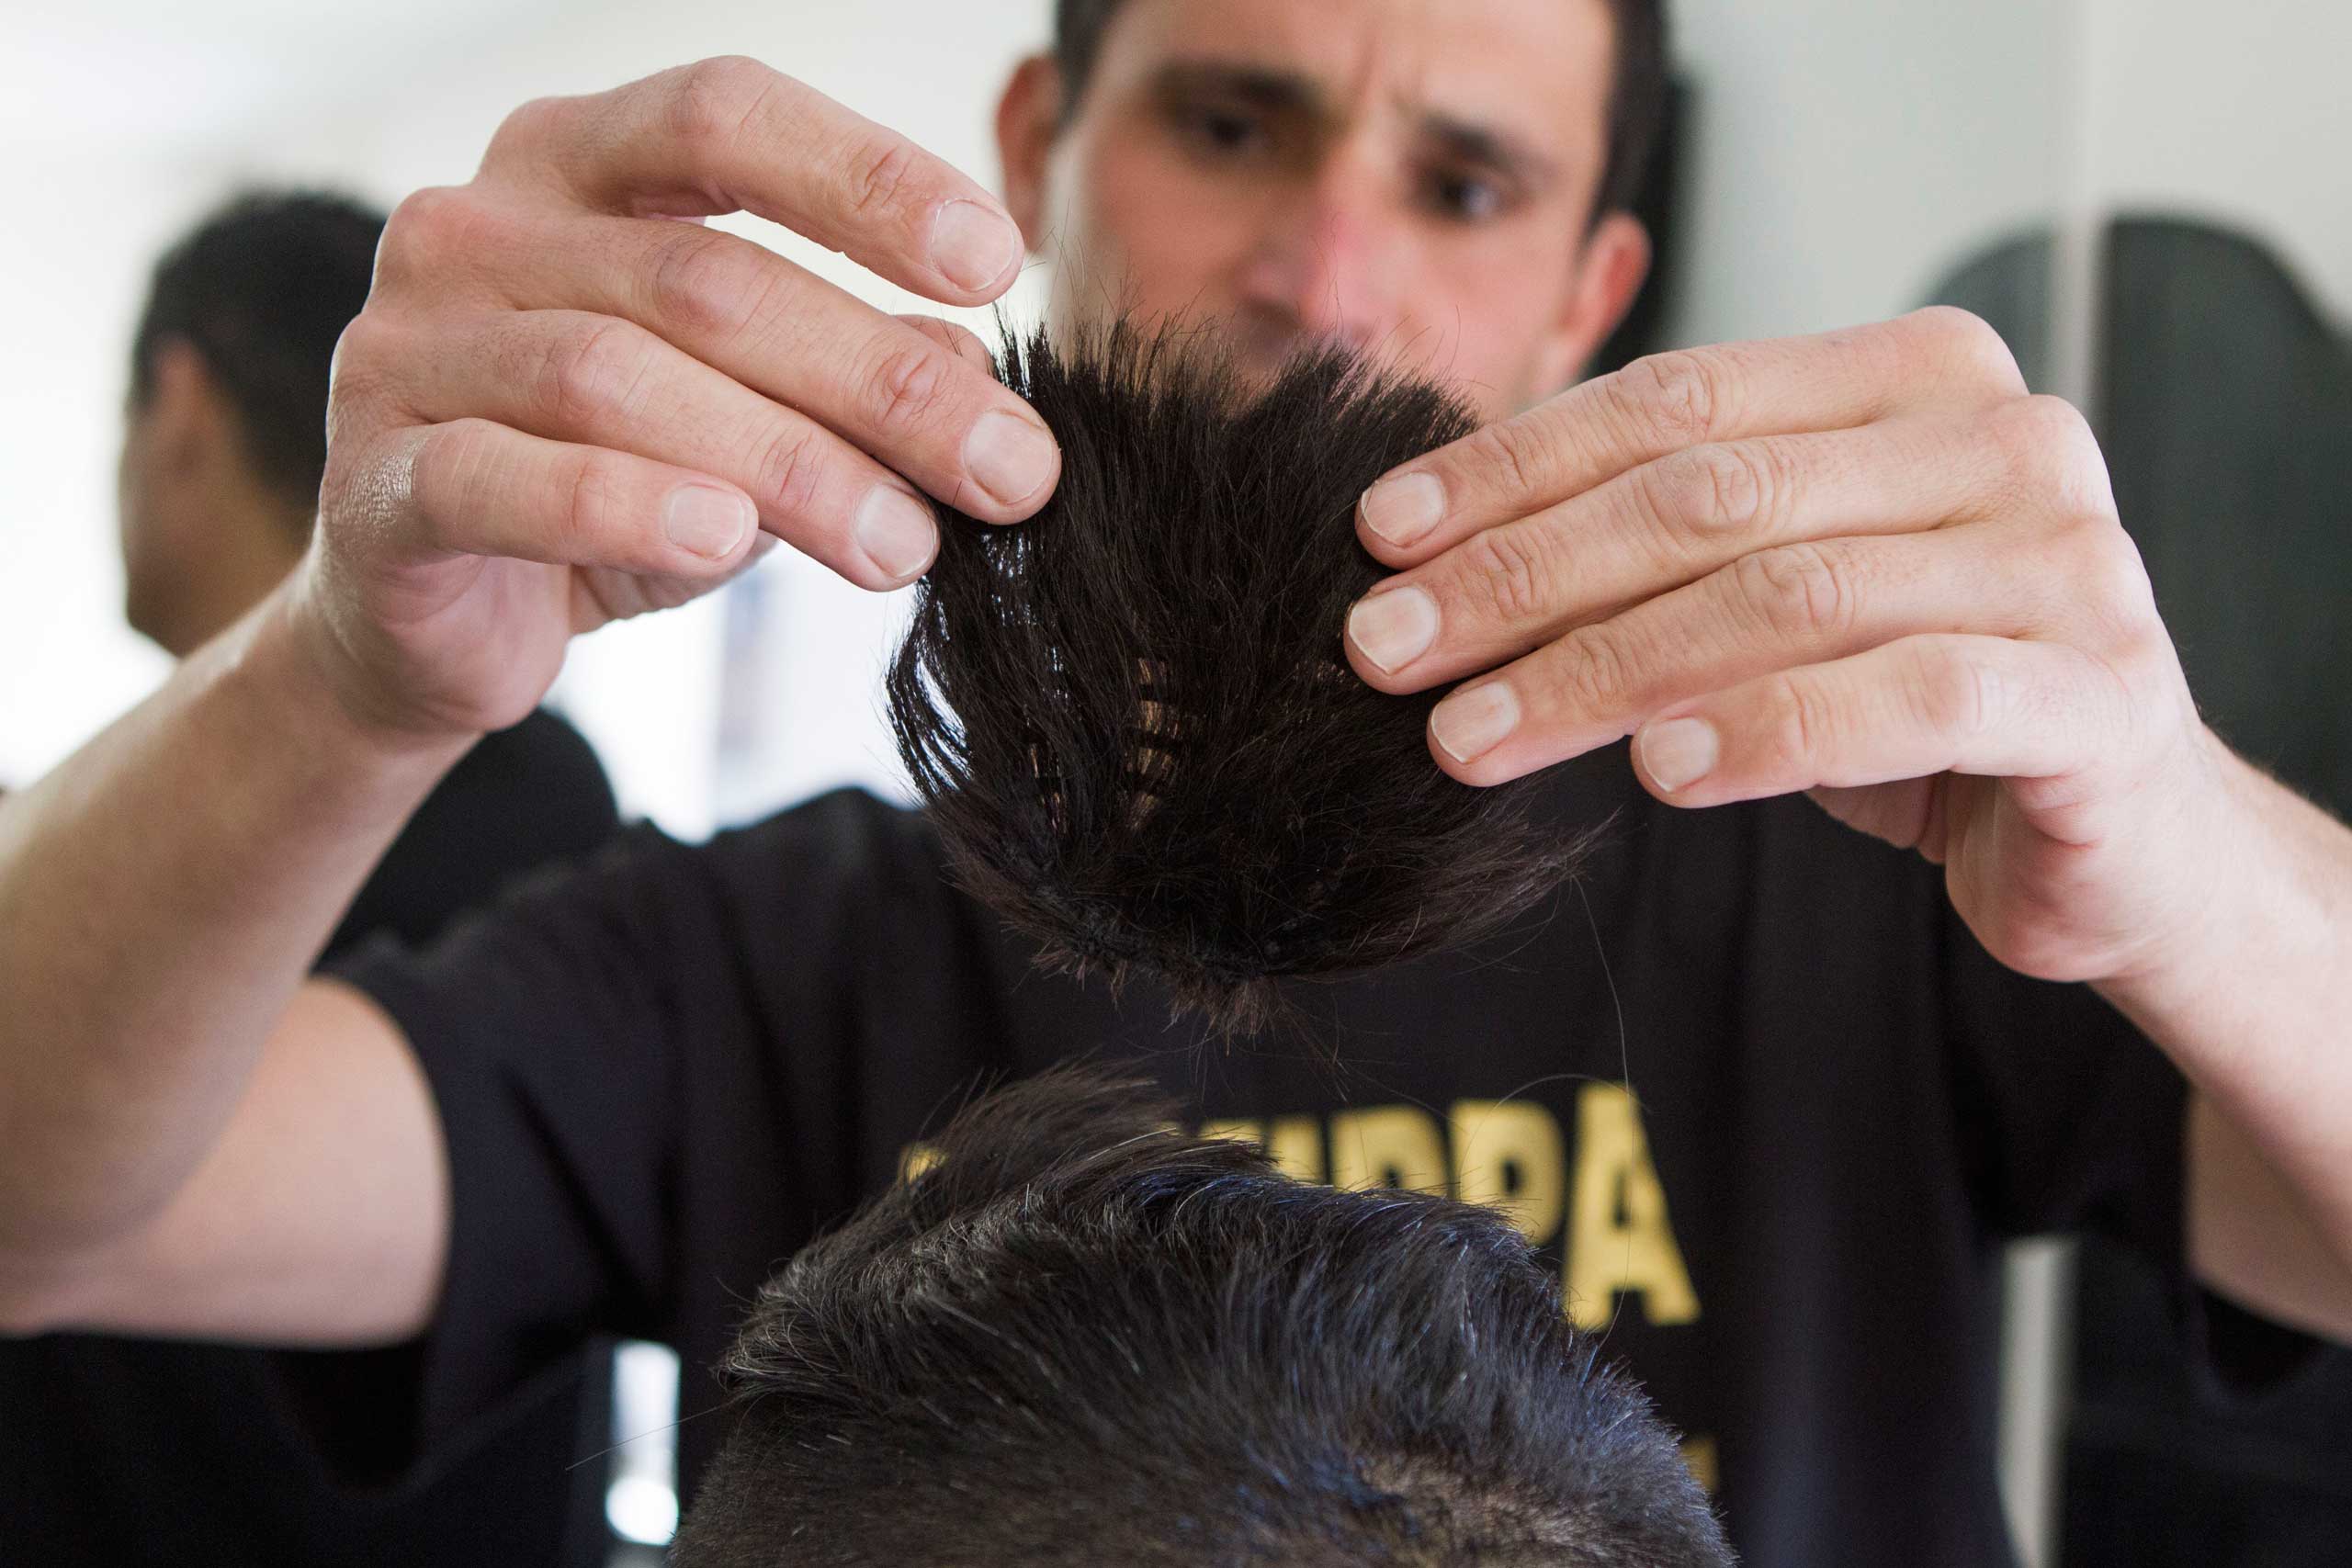 Israeli hairdresser Shalom Koresh places a yarmulke, a skullcap made of hair samples, on a man's head in the city of Rehovot, Israel on Jan. 21, 2015.